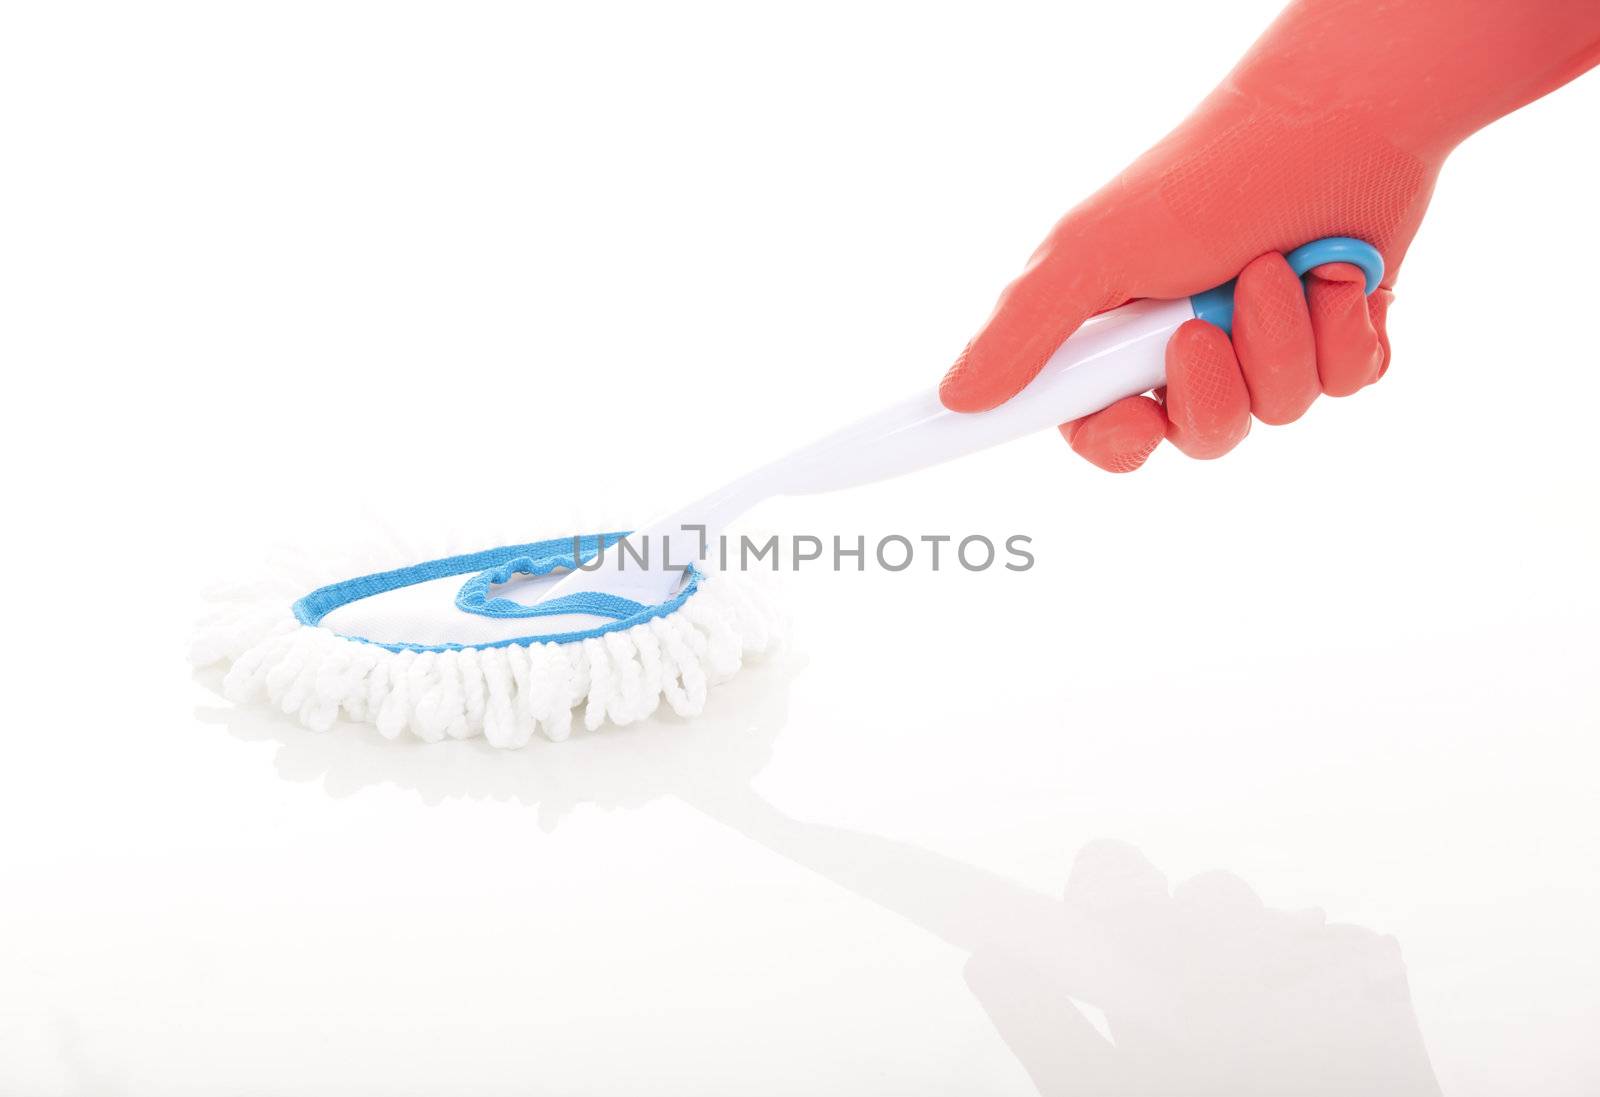 Latex cleaning glove on white background